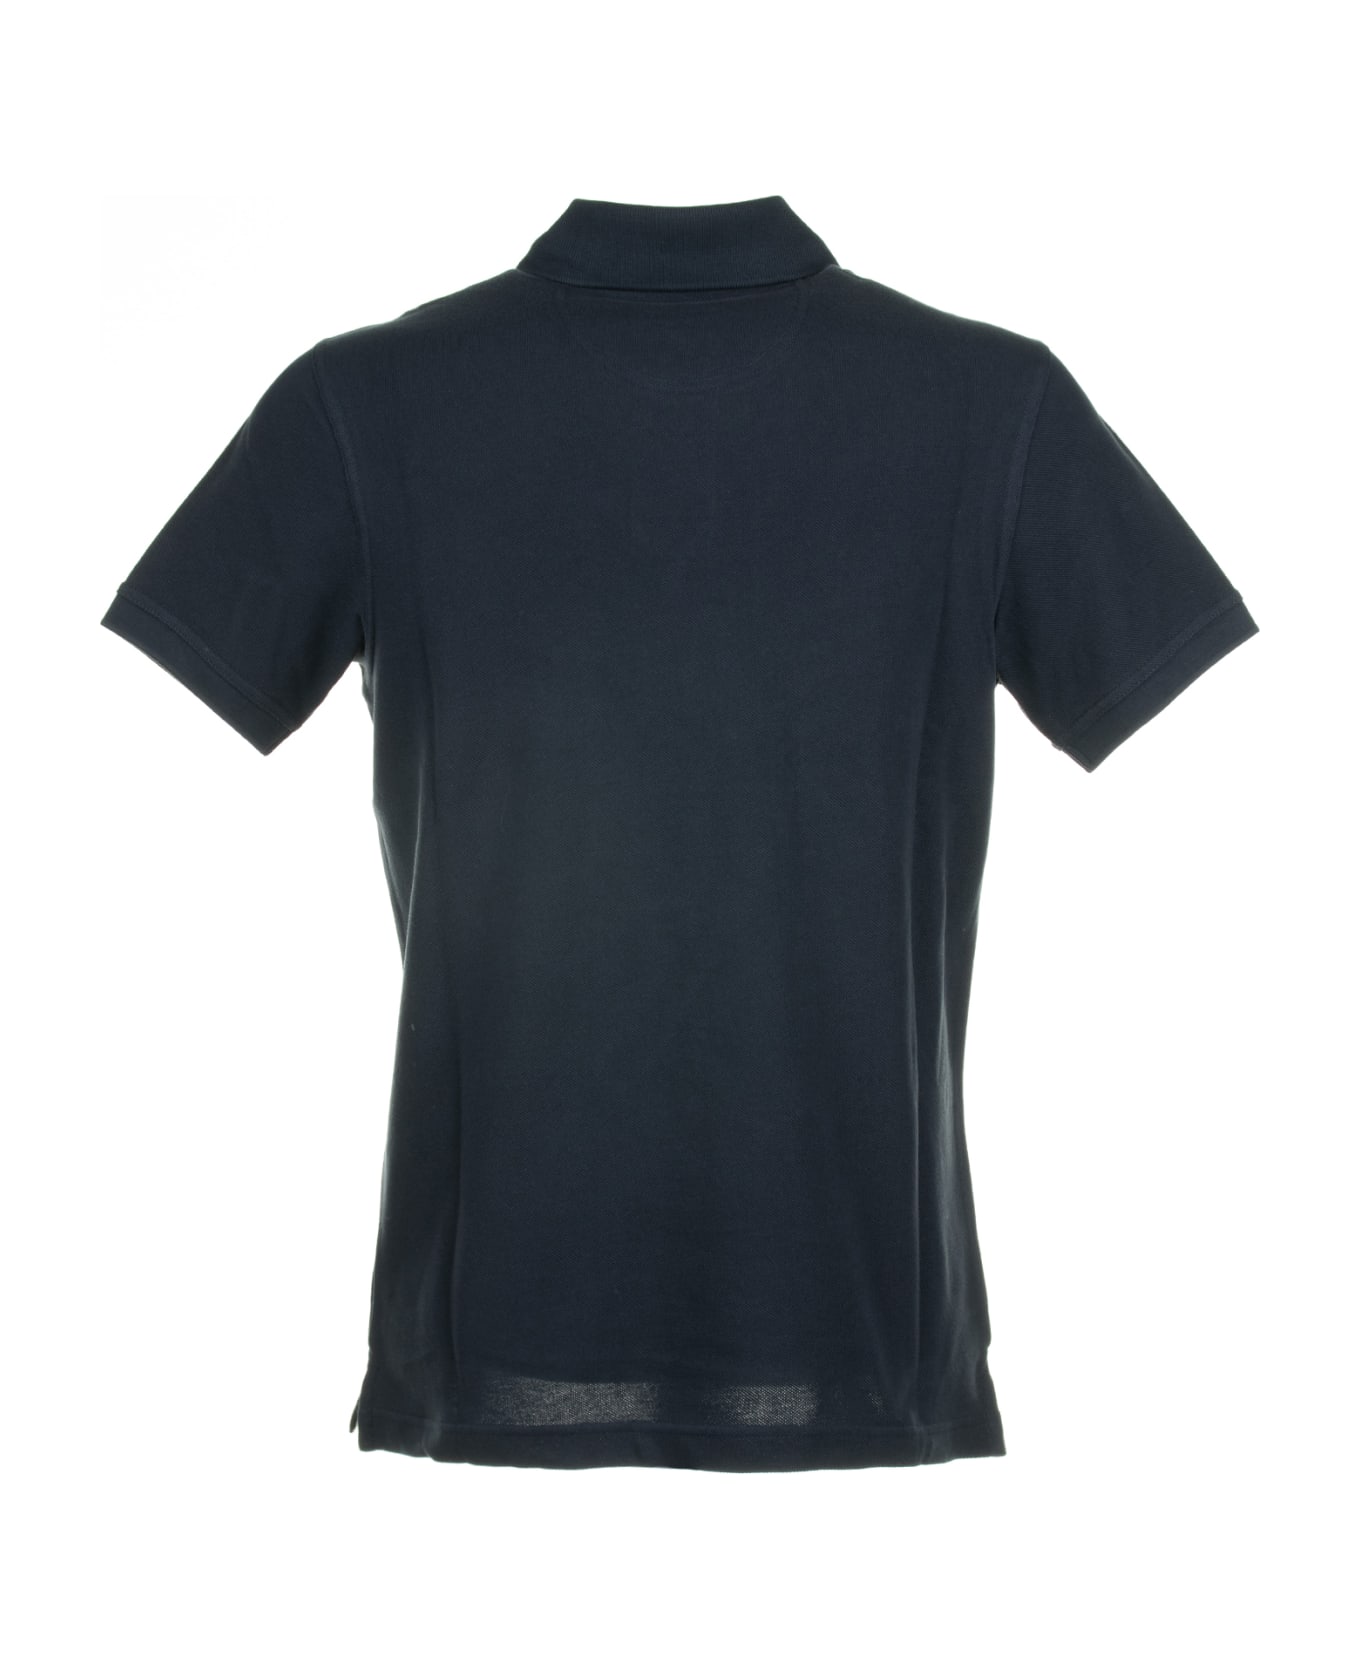 Barbour Navy Blue Short-sleeved Piqué Polo Shirt - NEW NAVY ポロシャツ